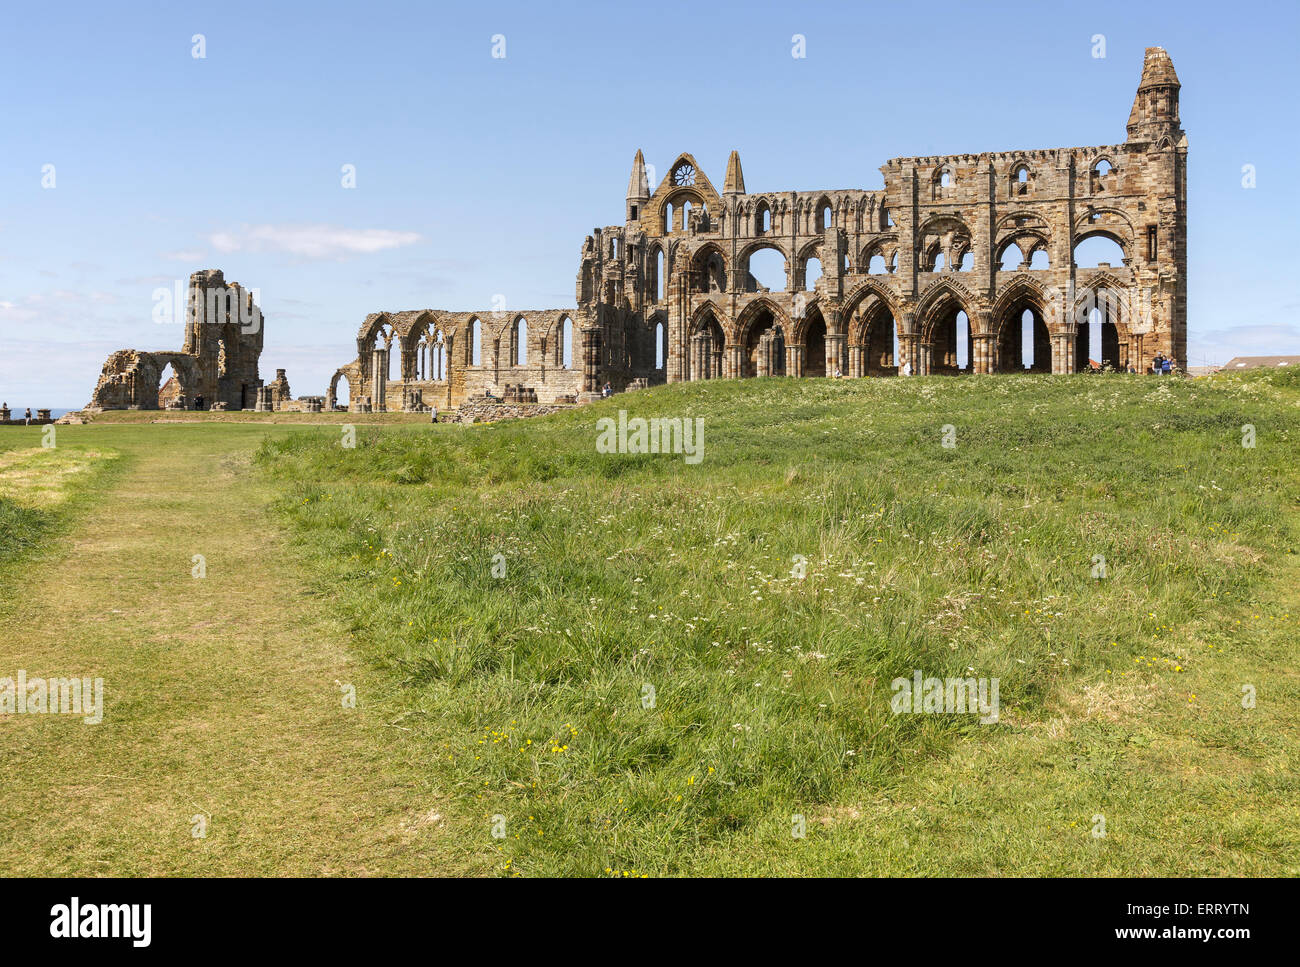 L'Abbaye de Whitby, Yorkshire, Angleterre Banque D'Images